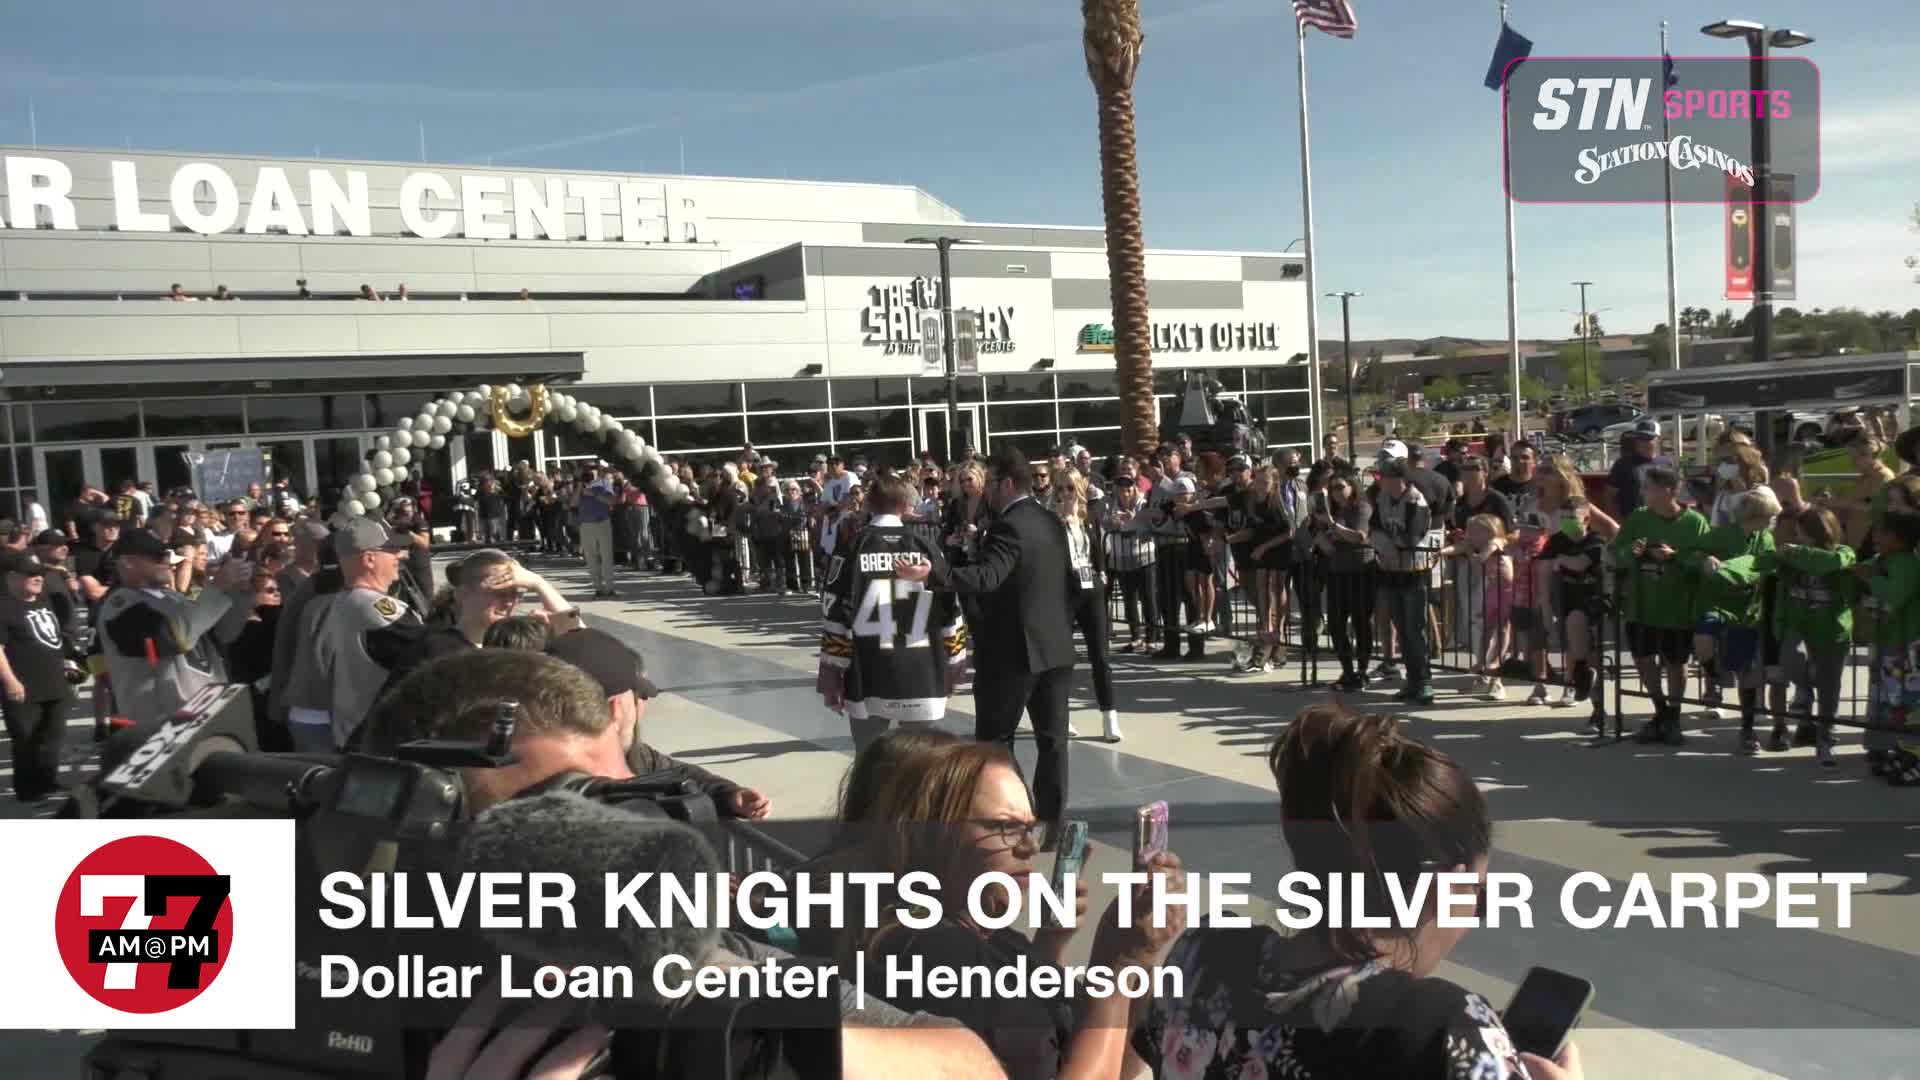 Silver Knights on the Silver Carpet